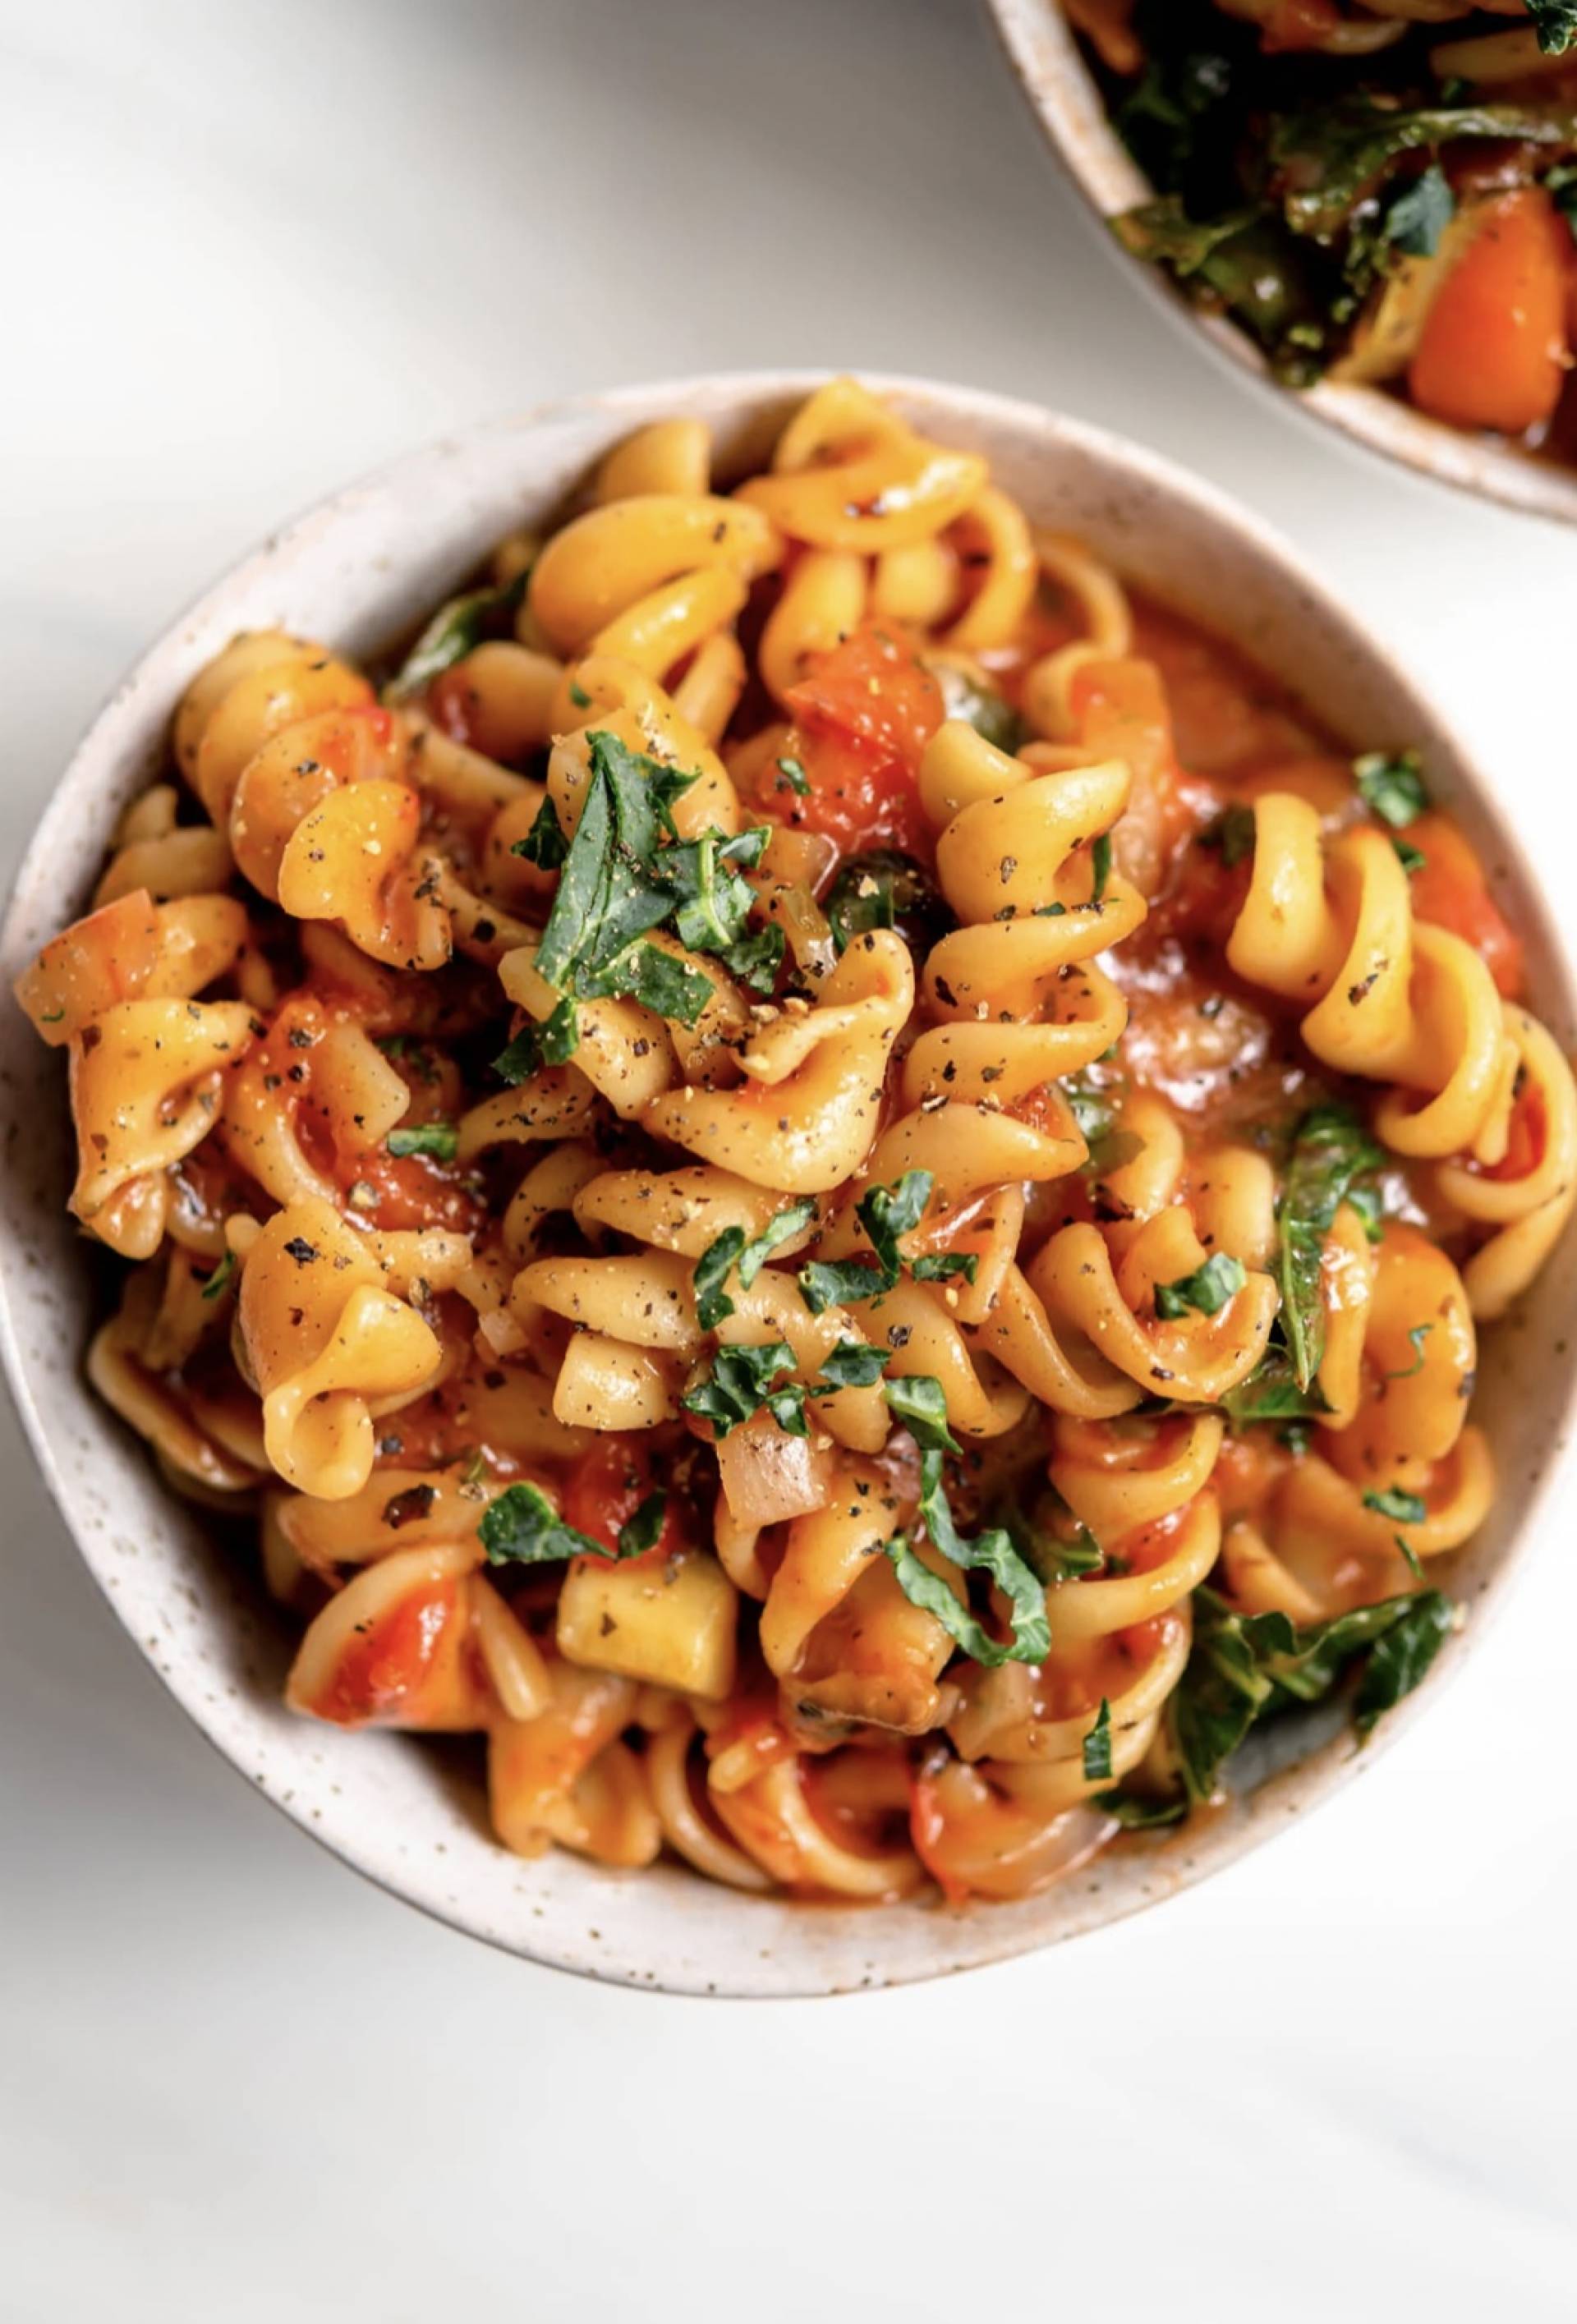 Roasted Tomato, Garlic, and Kale Creamy Pasta with local Beef